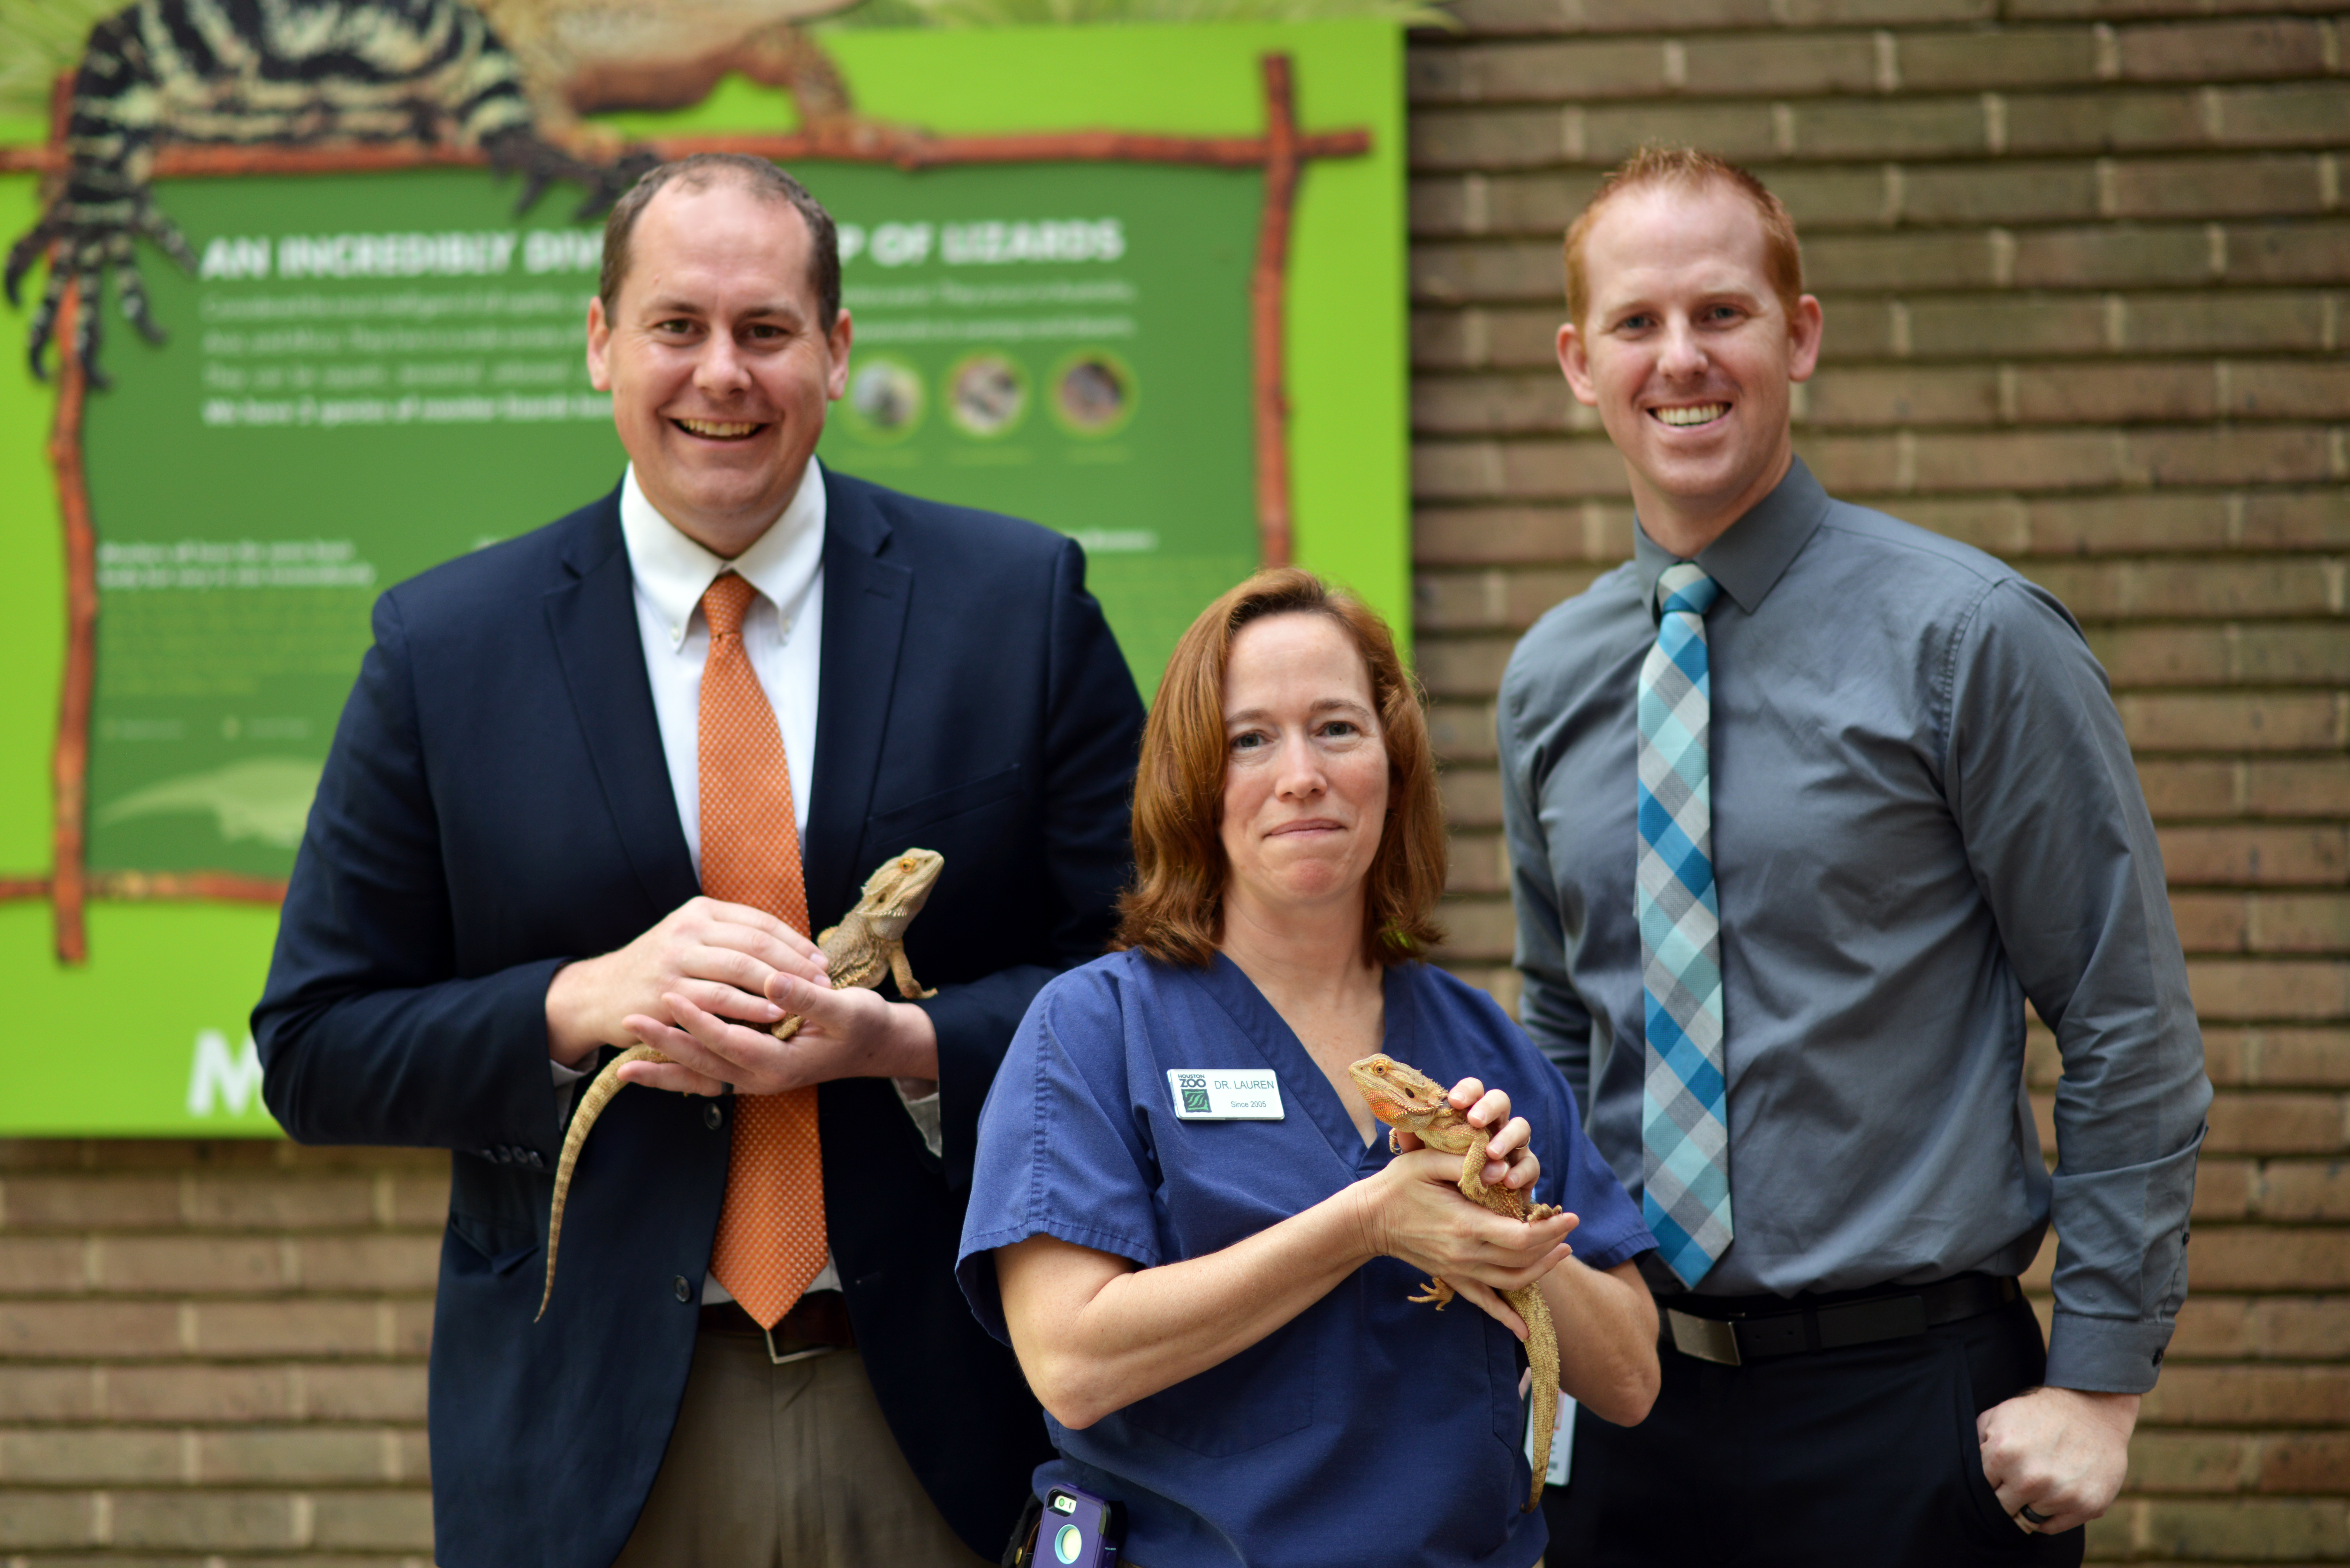 In front, Dr. Lauren Howard, associate veterinarian at the Houston Zoo. In back, from the Baylor College of Medicine Orthotics and Prosthetics Program, Jared Howell, director, and Lorin Merkley, instructor.